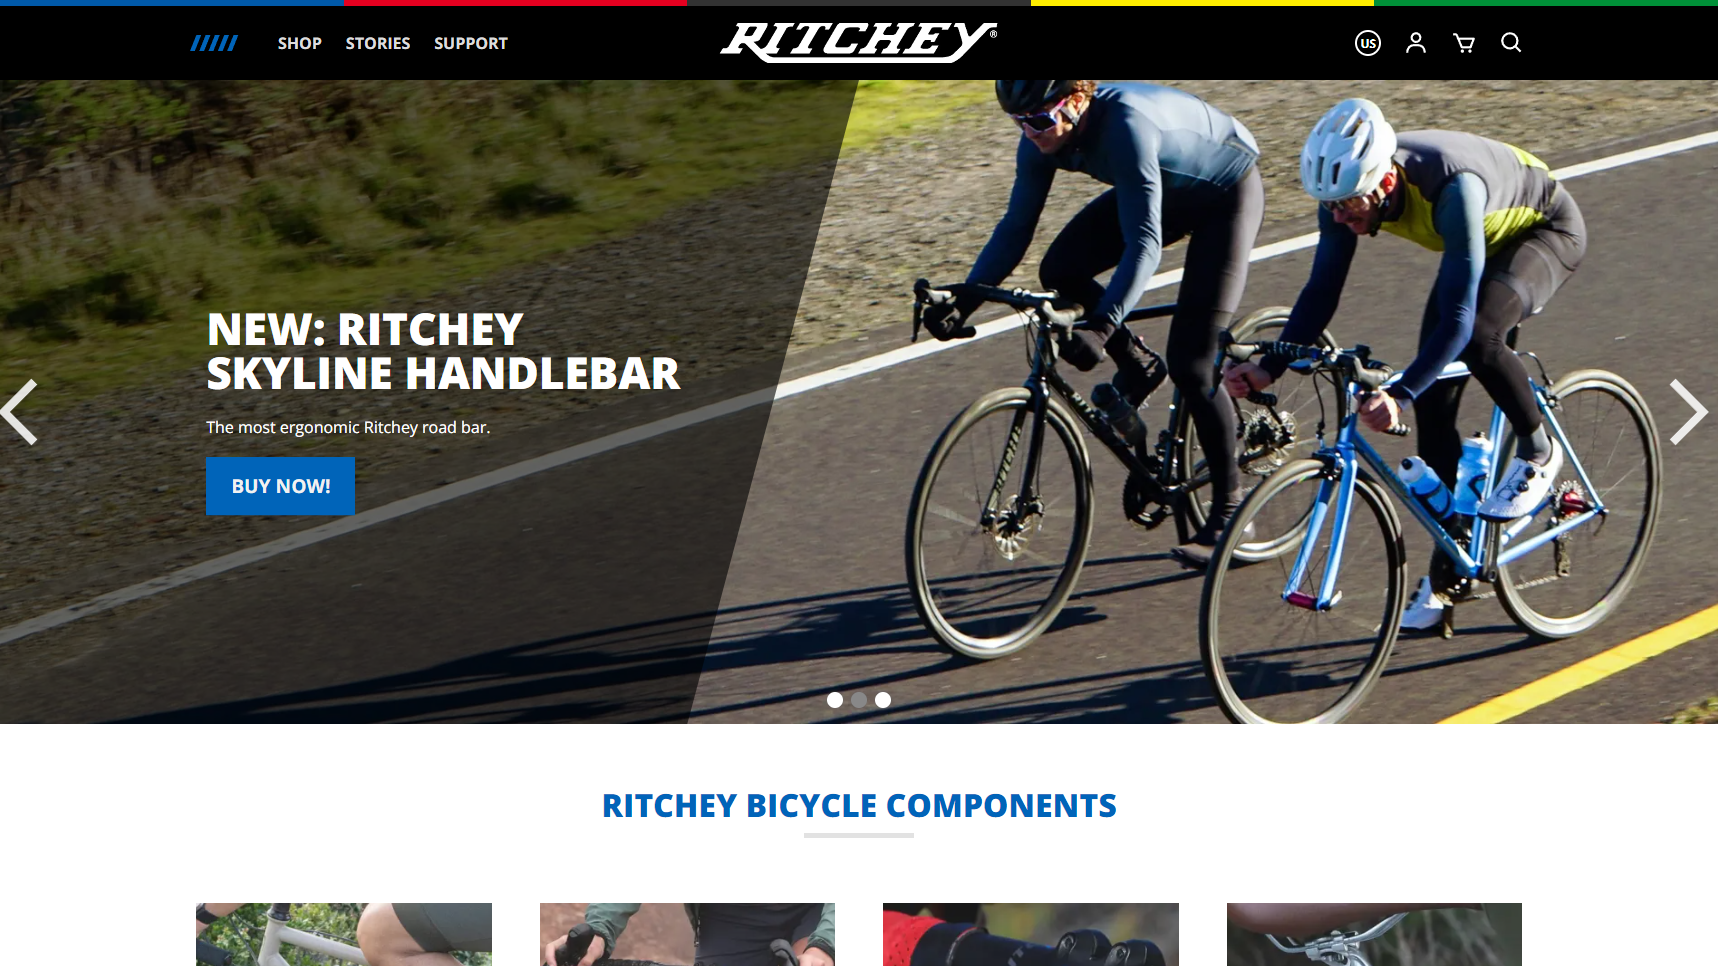 Ritchey - Bicycle Parts Manufacturer